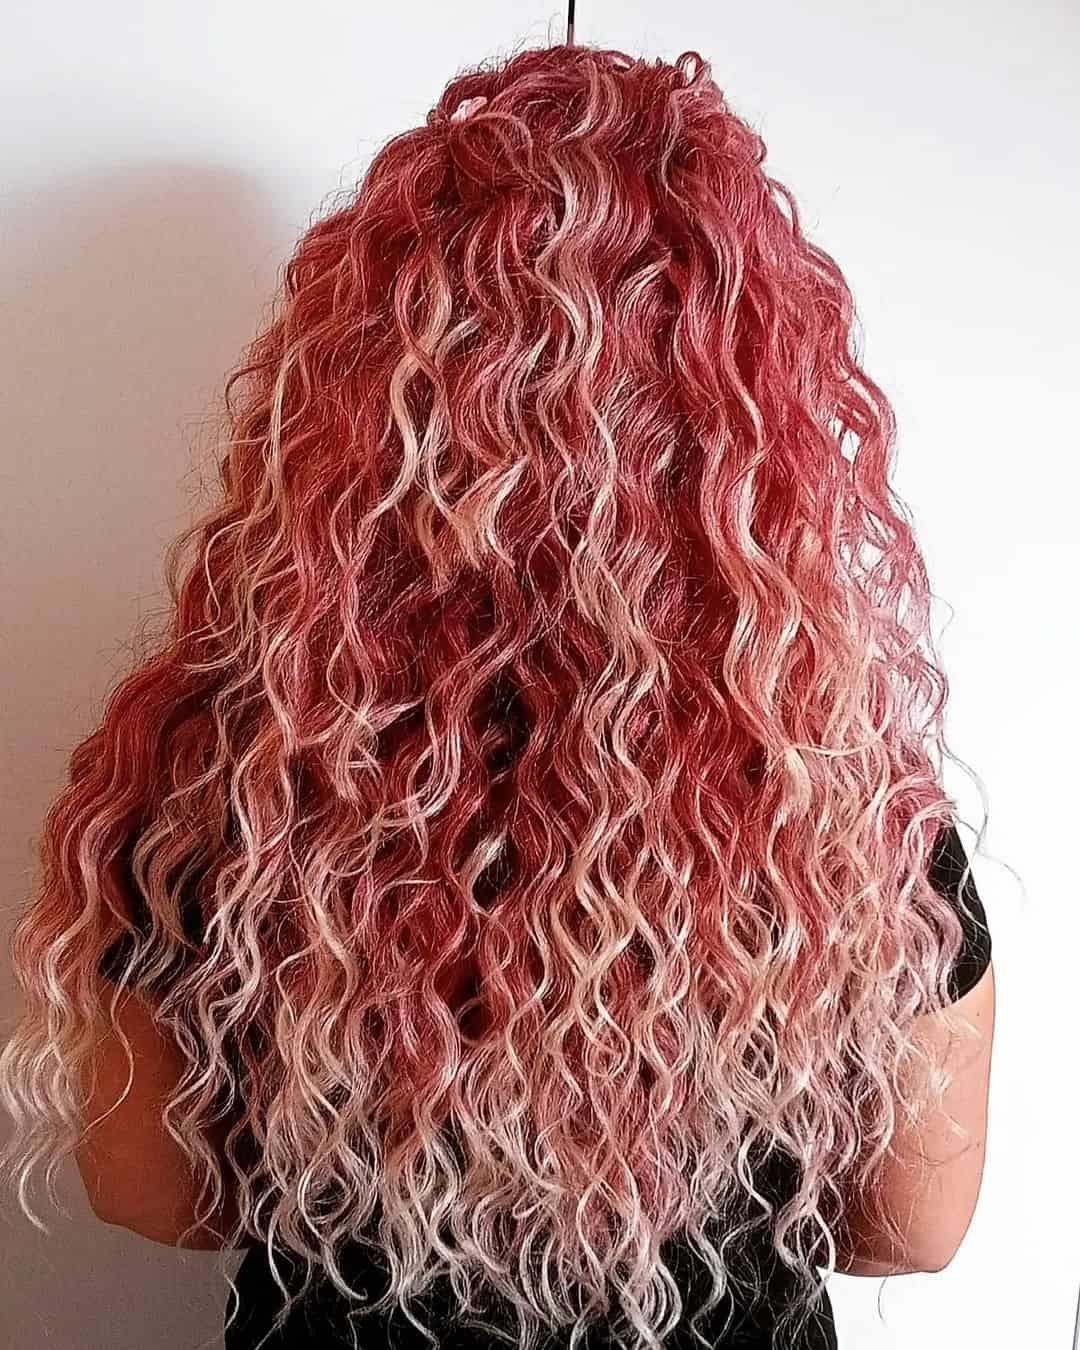 Pink & Red Crocheting Hairstyle